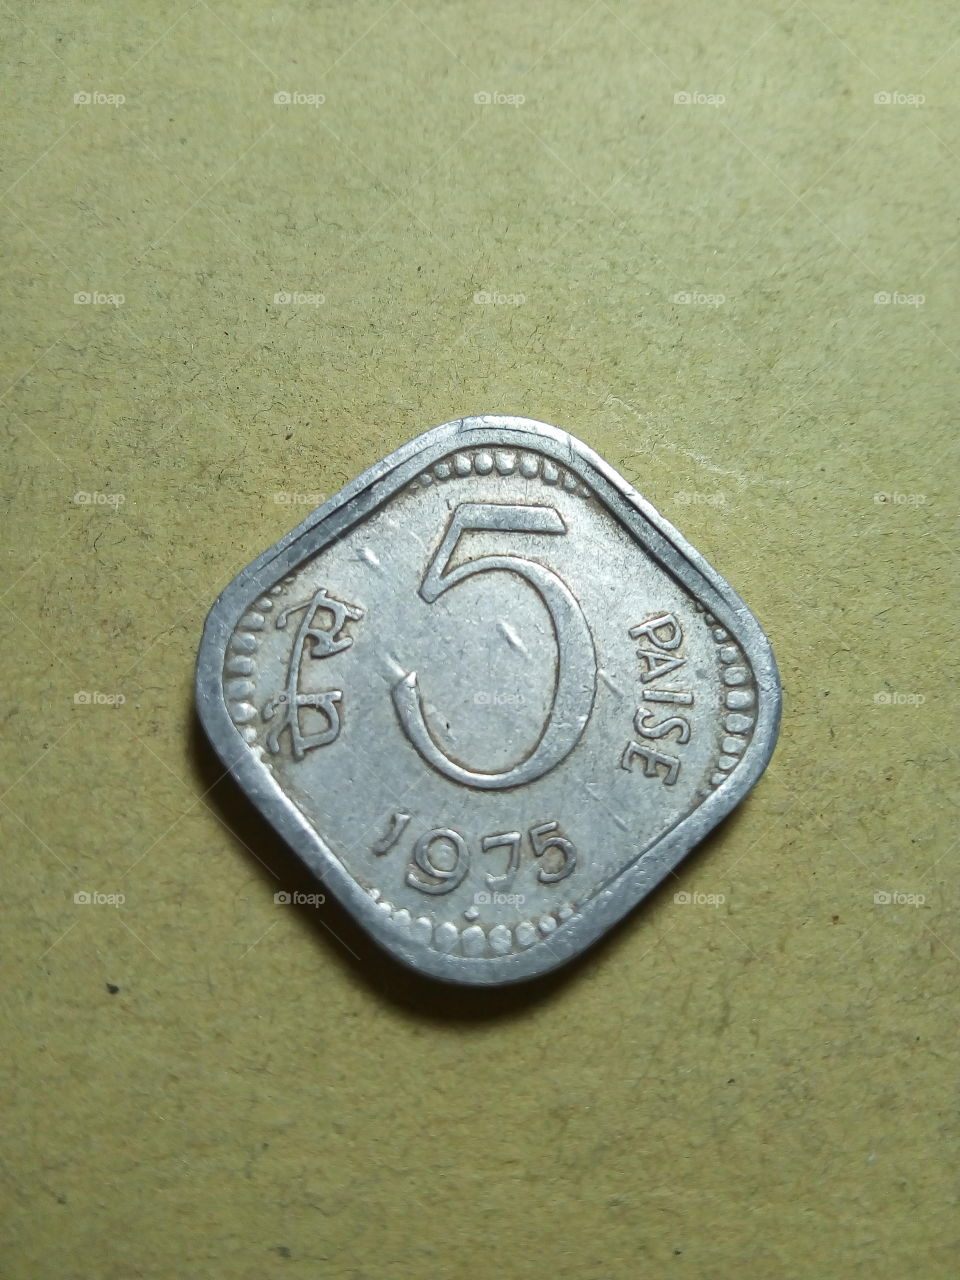 A coin of five paise- 1/20 share of Indian Rupee issued by Government of India in 1975.